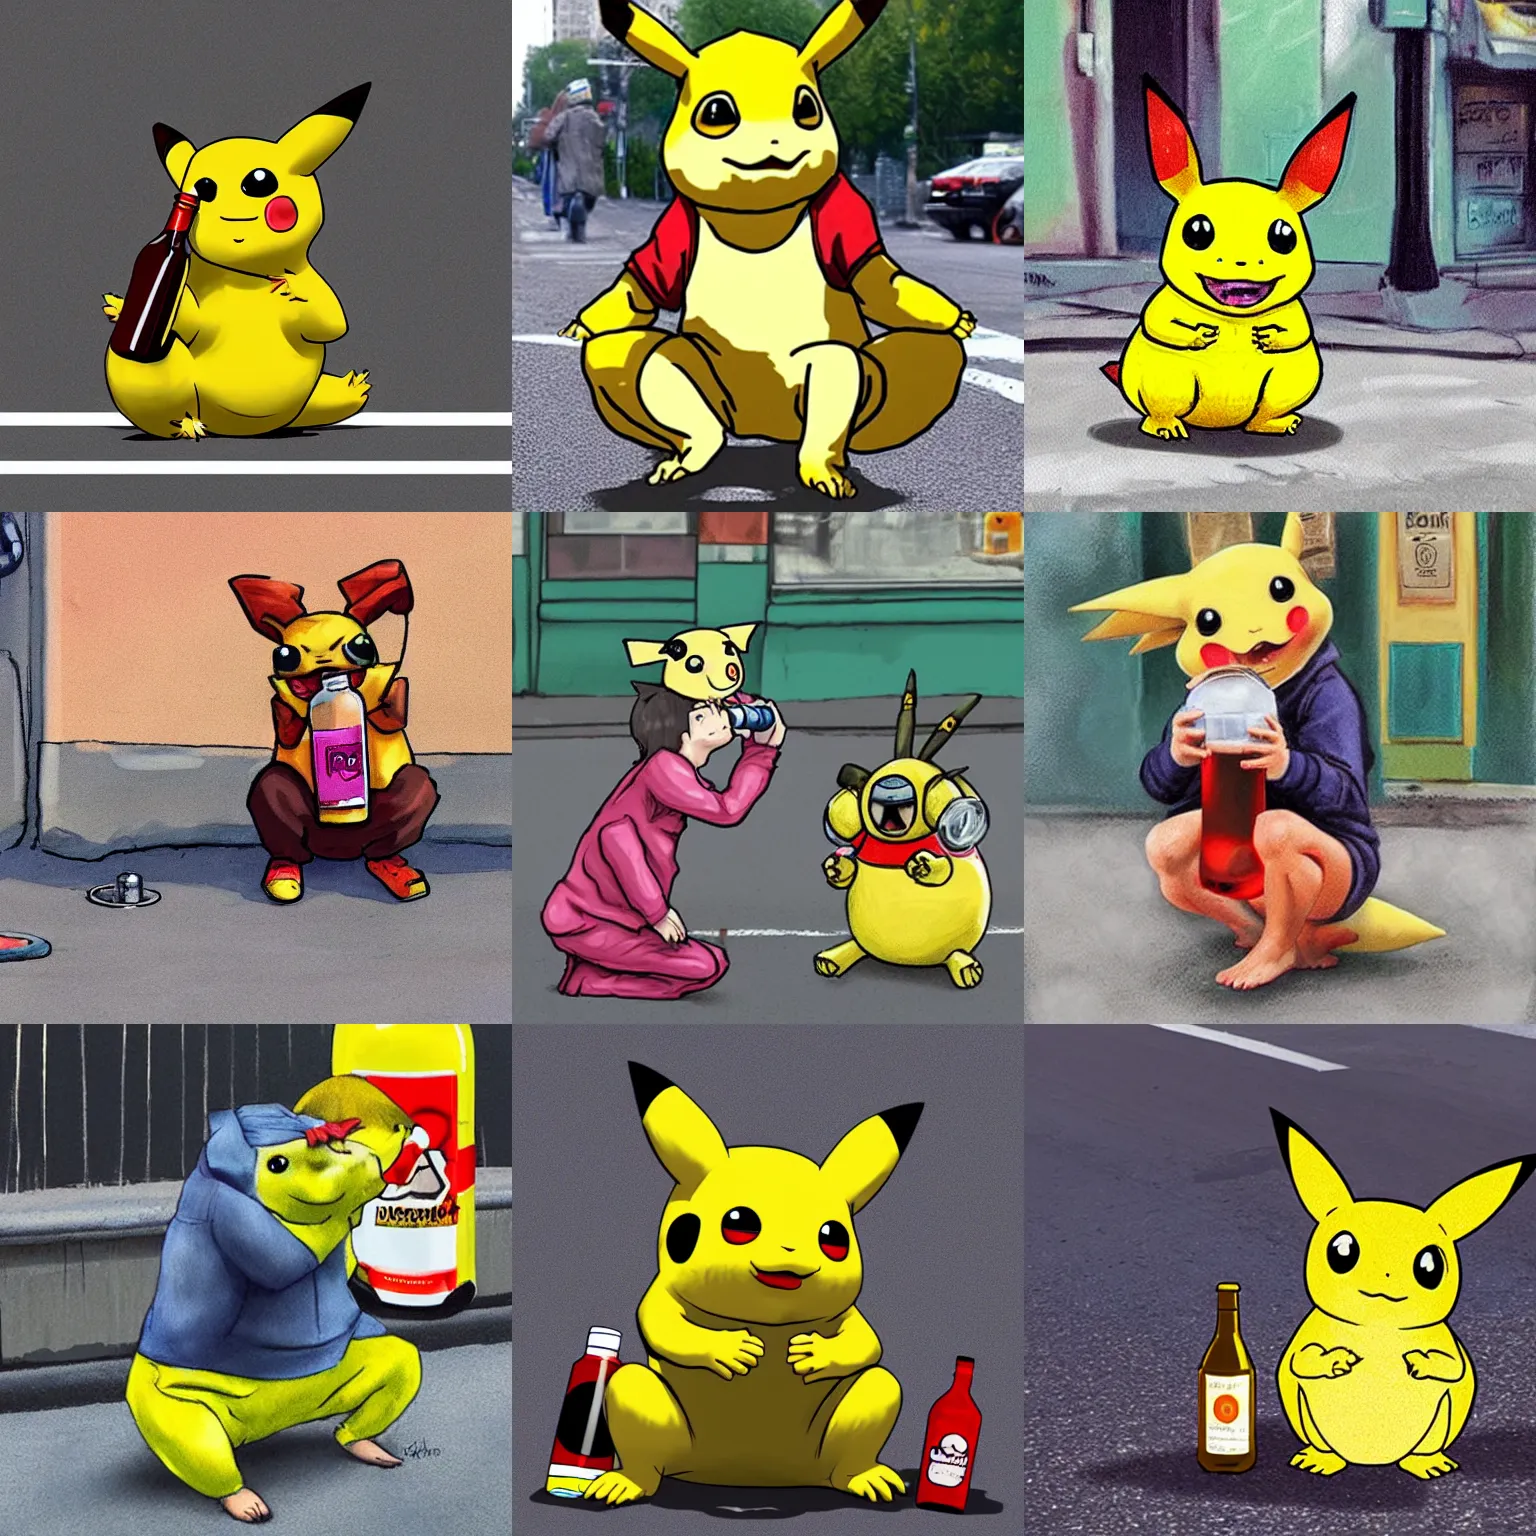 Prompt: pickachu as an alcoholic squatting on a street corner drinking from a bottle, hyper realistic